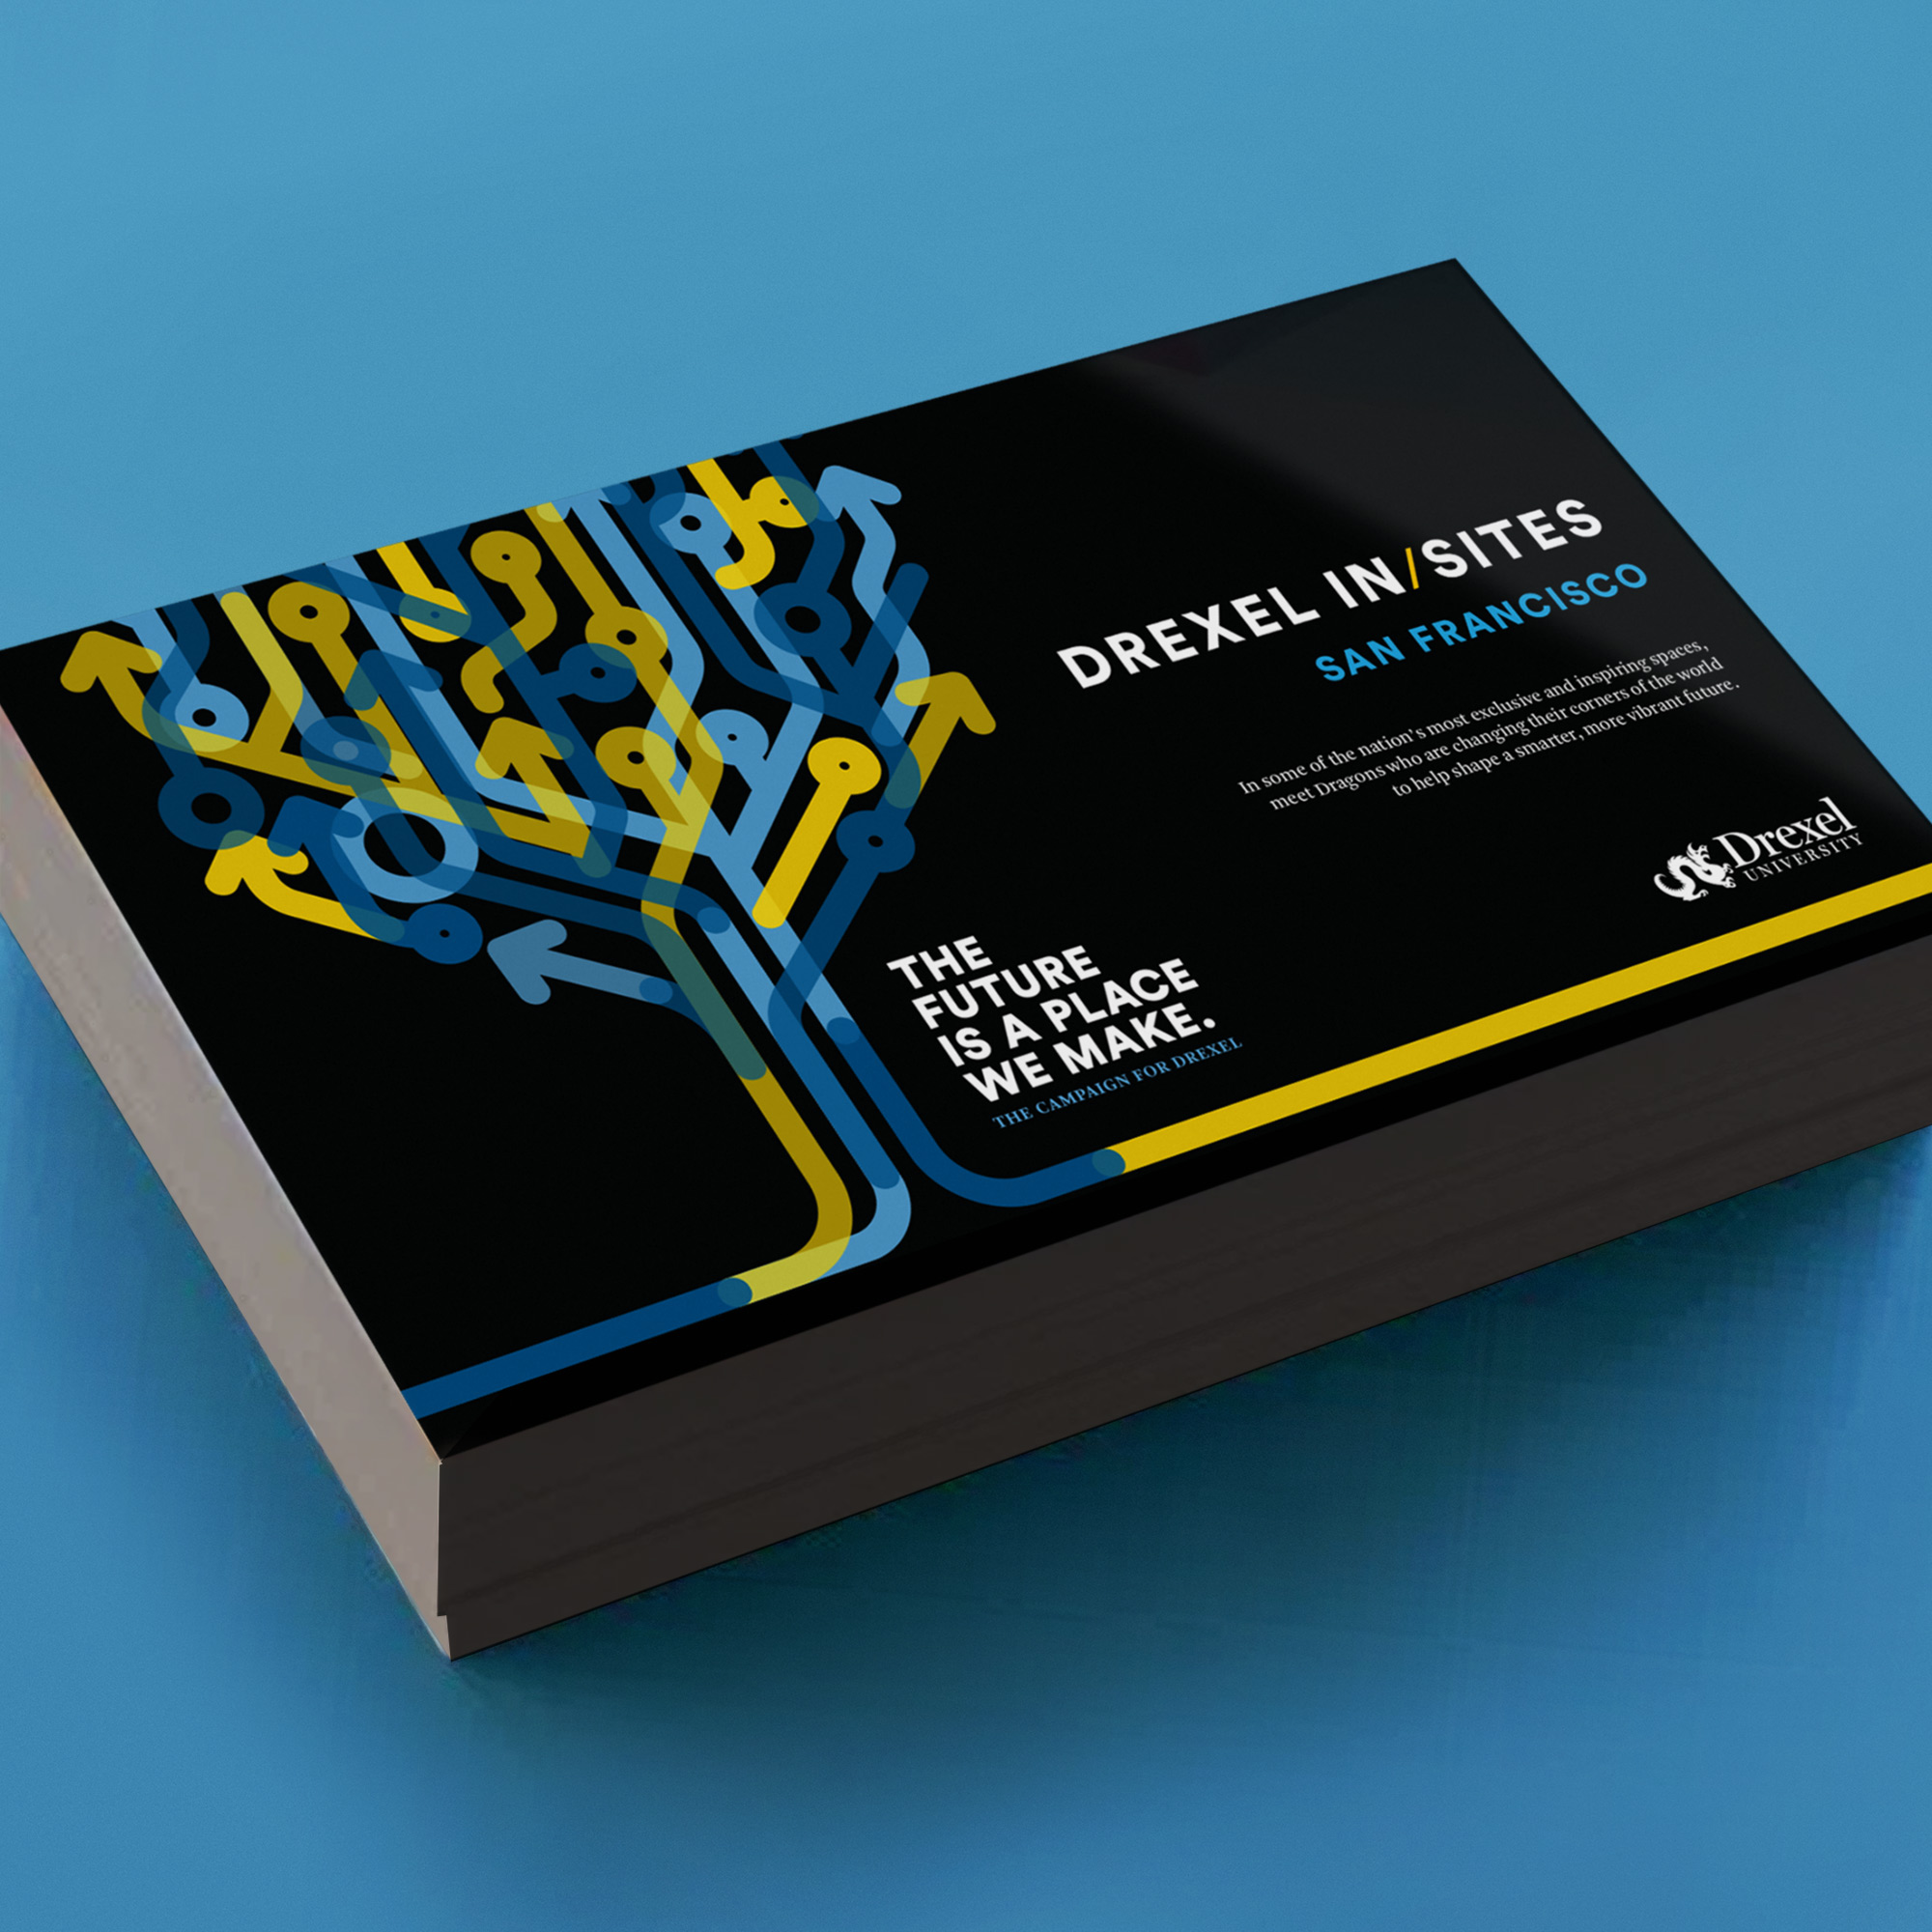 New brand campaign for Drexel University, In/Sites postcard